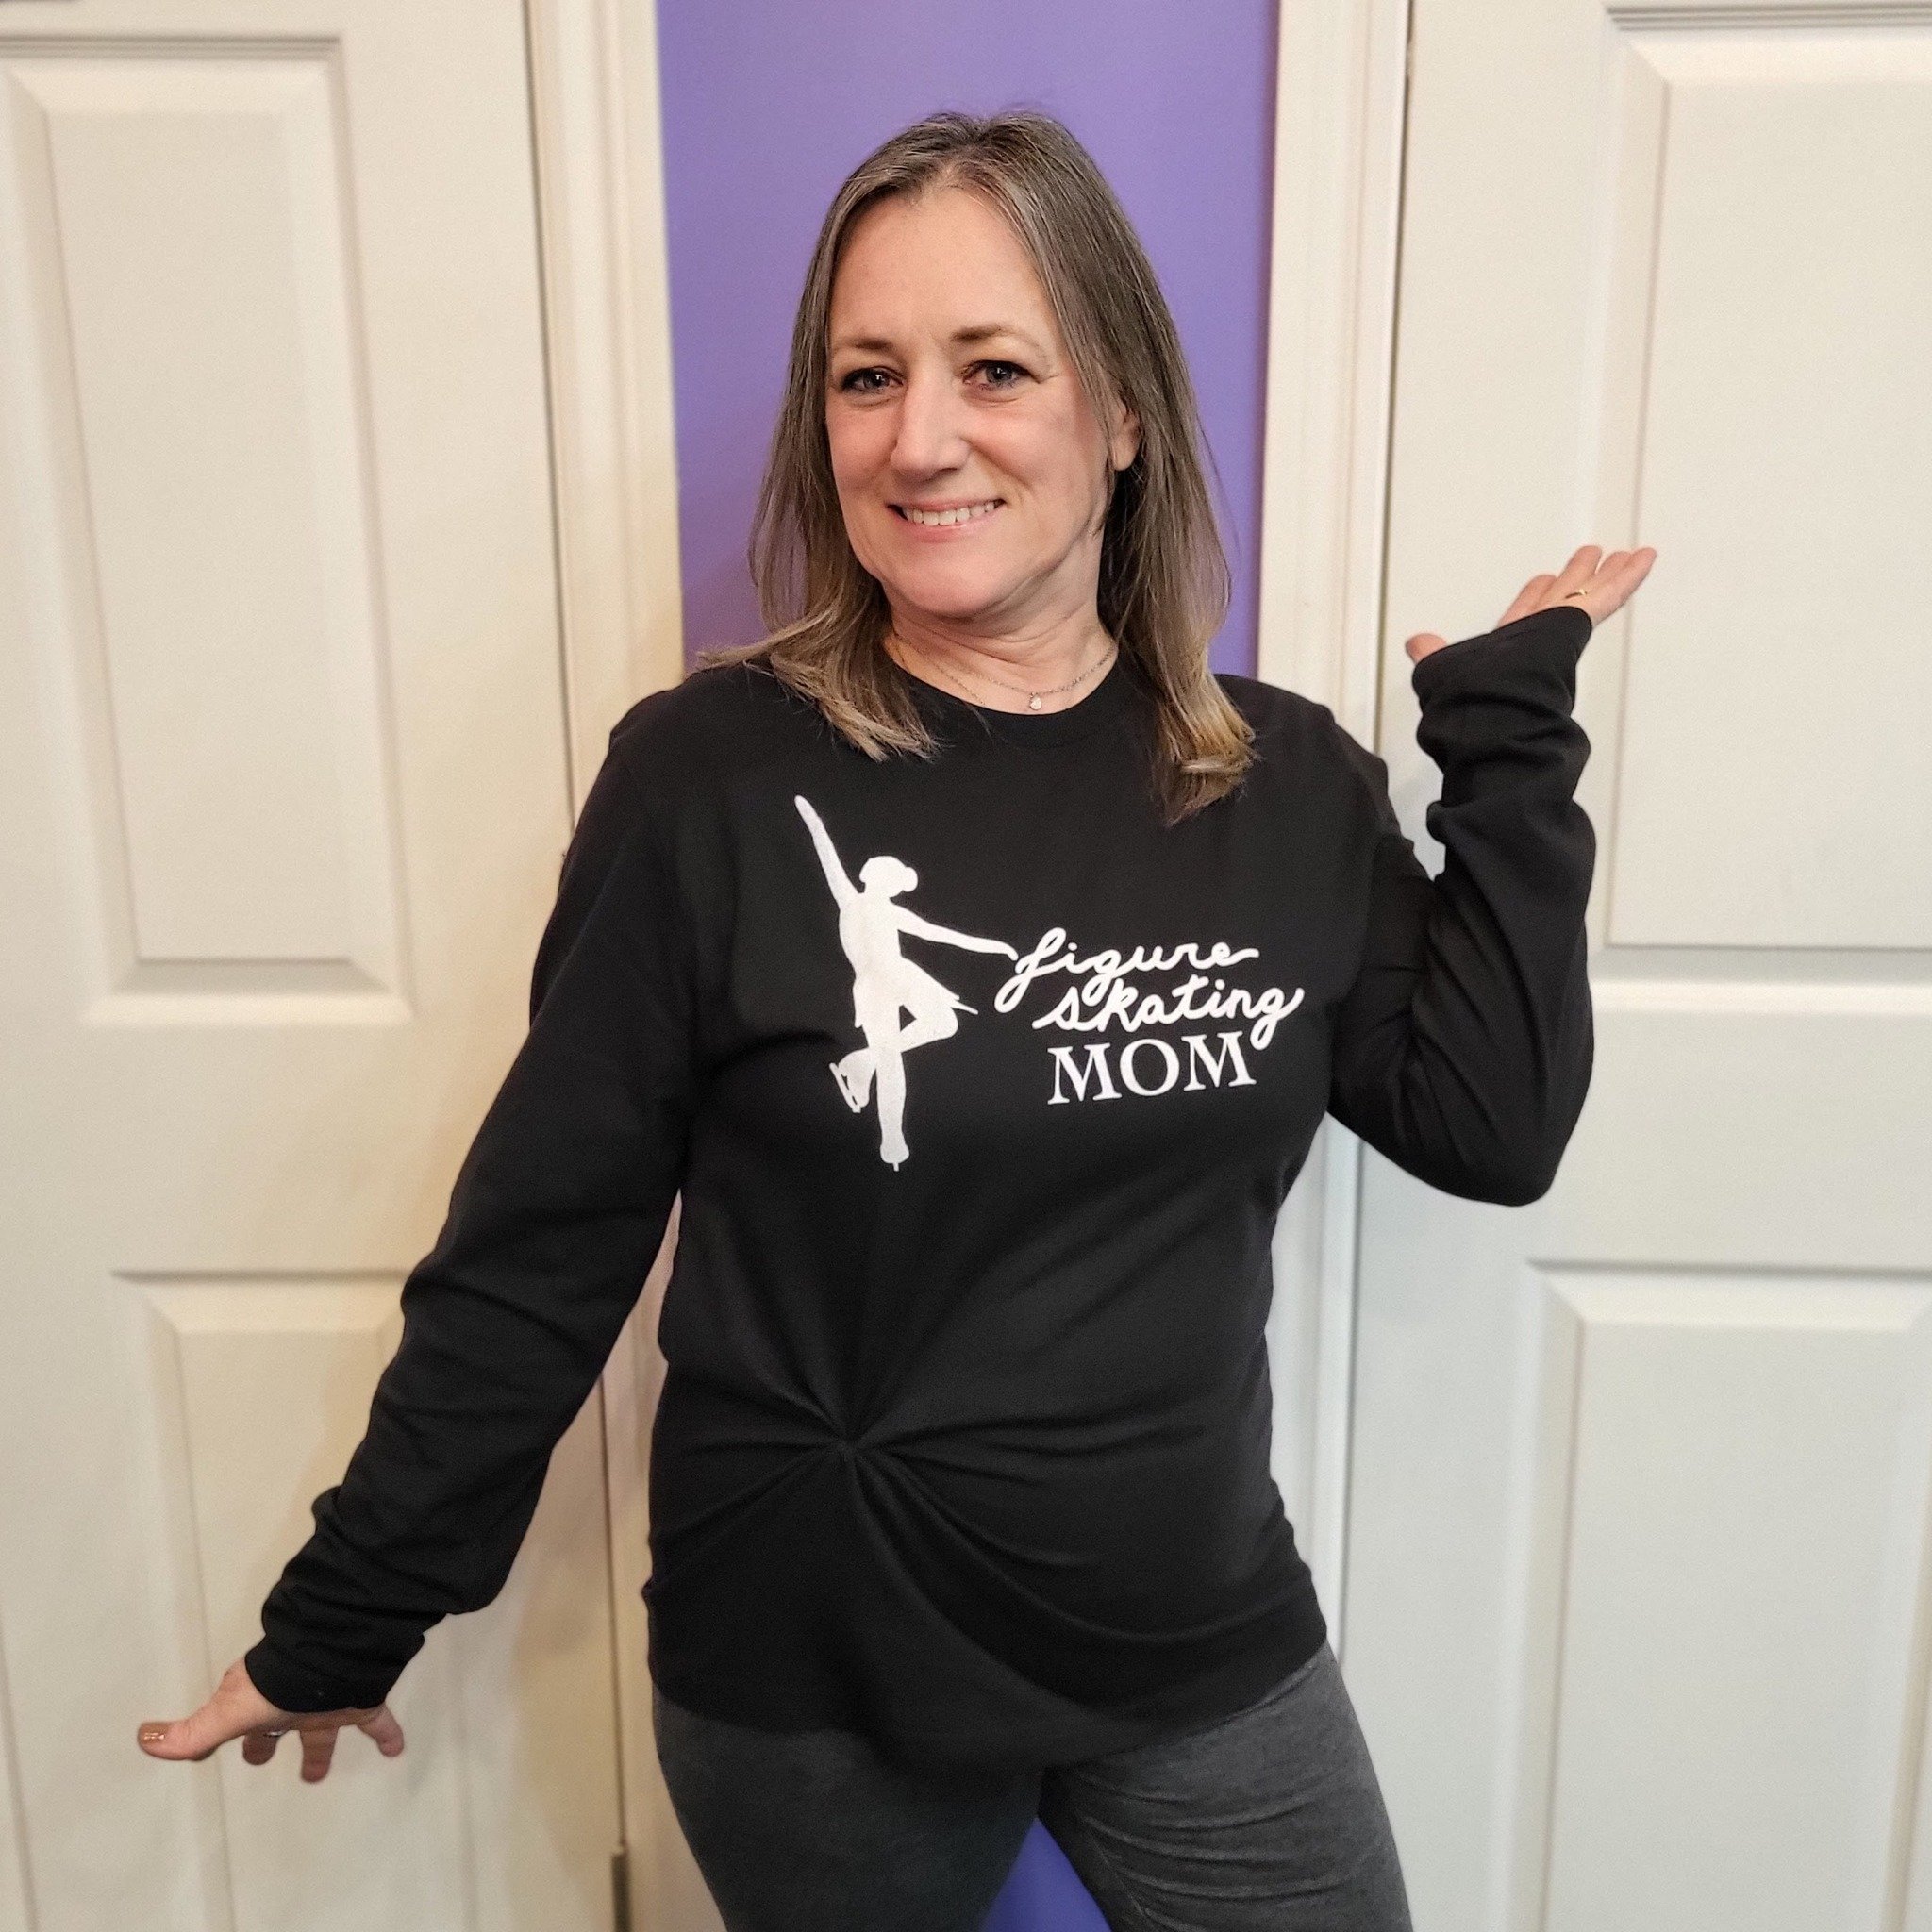 Don't forget about Mom!

Mother's Day is coming up fast...

Explore our Shirt Shop for Skate Mom accessories and apparel designed with the busy mom in mind 💜

Shop on our website any time at Skatersedgewny.com 🥰